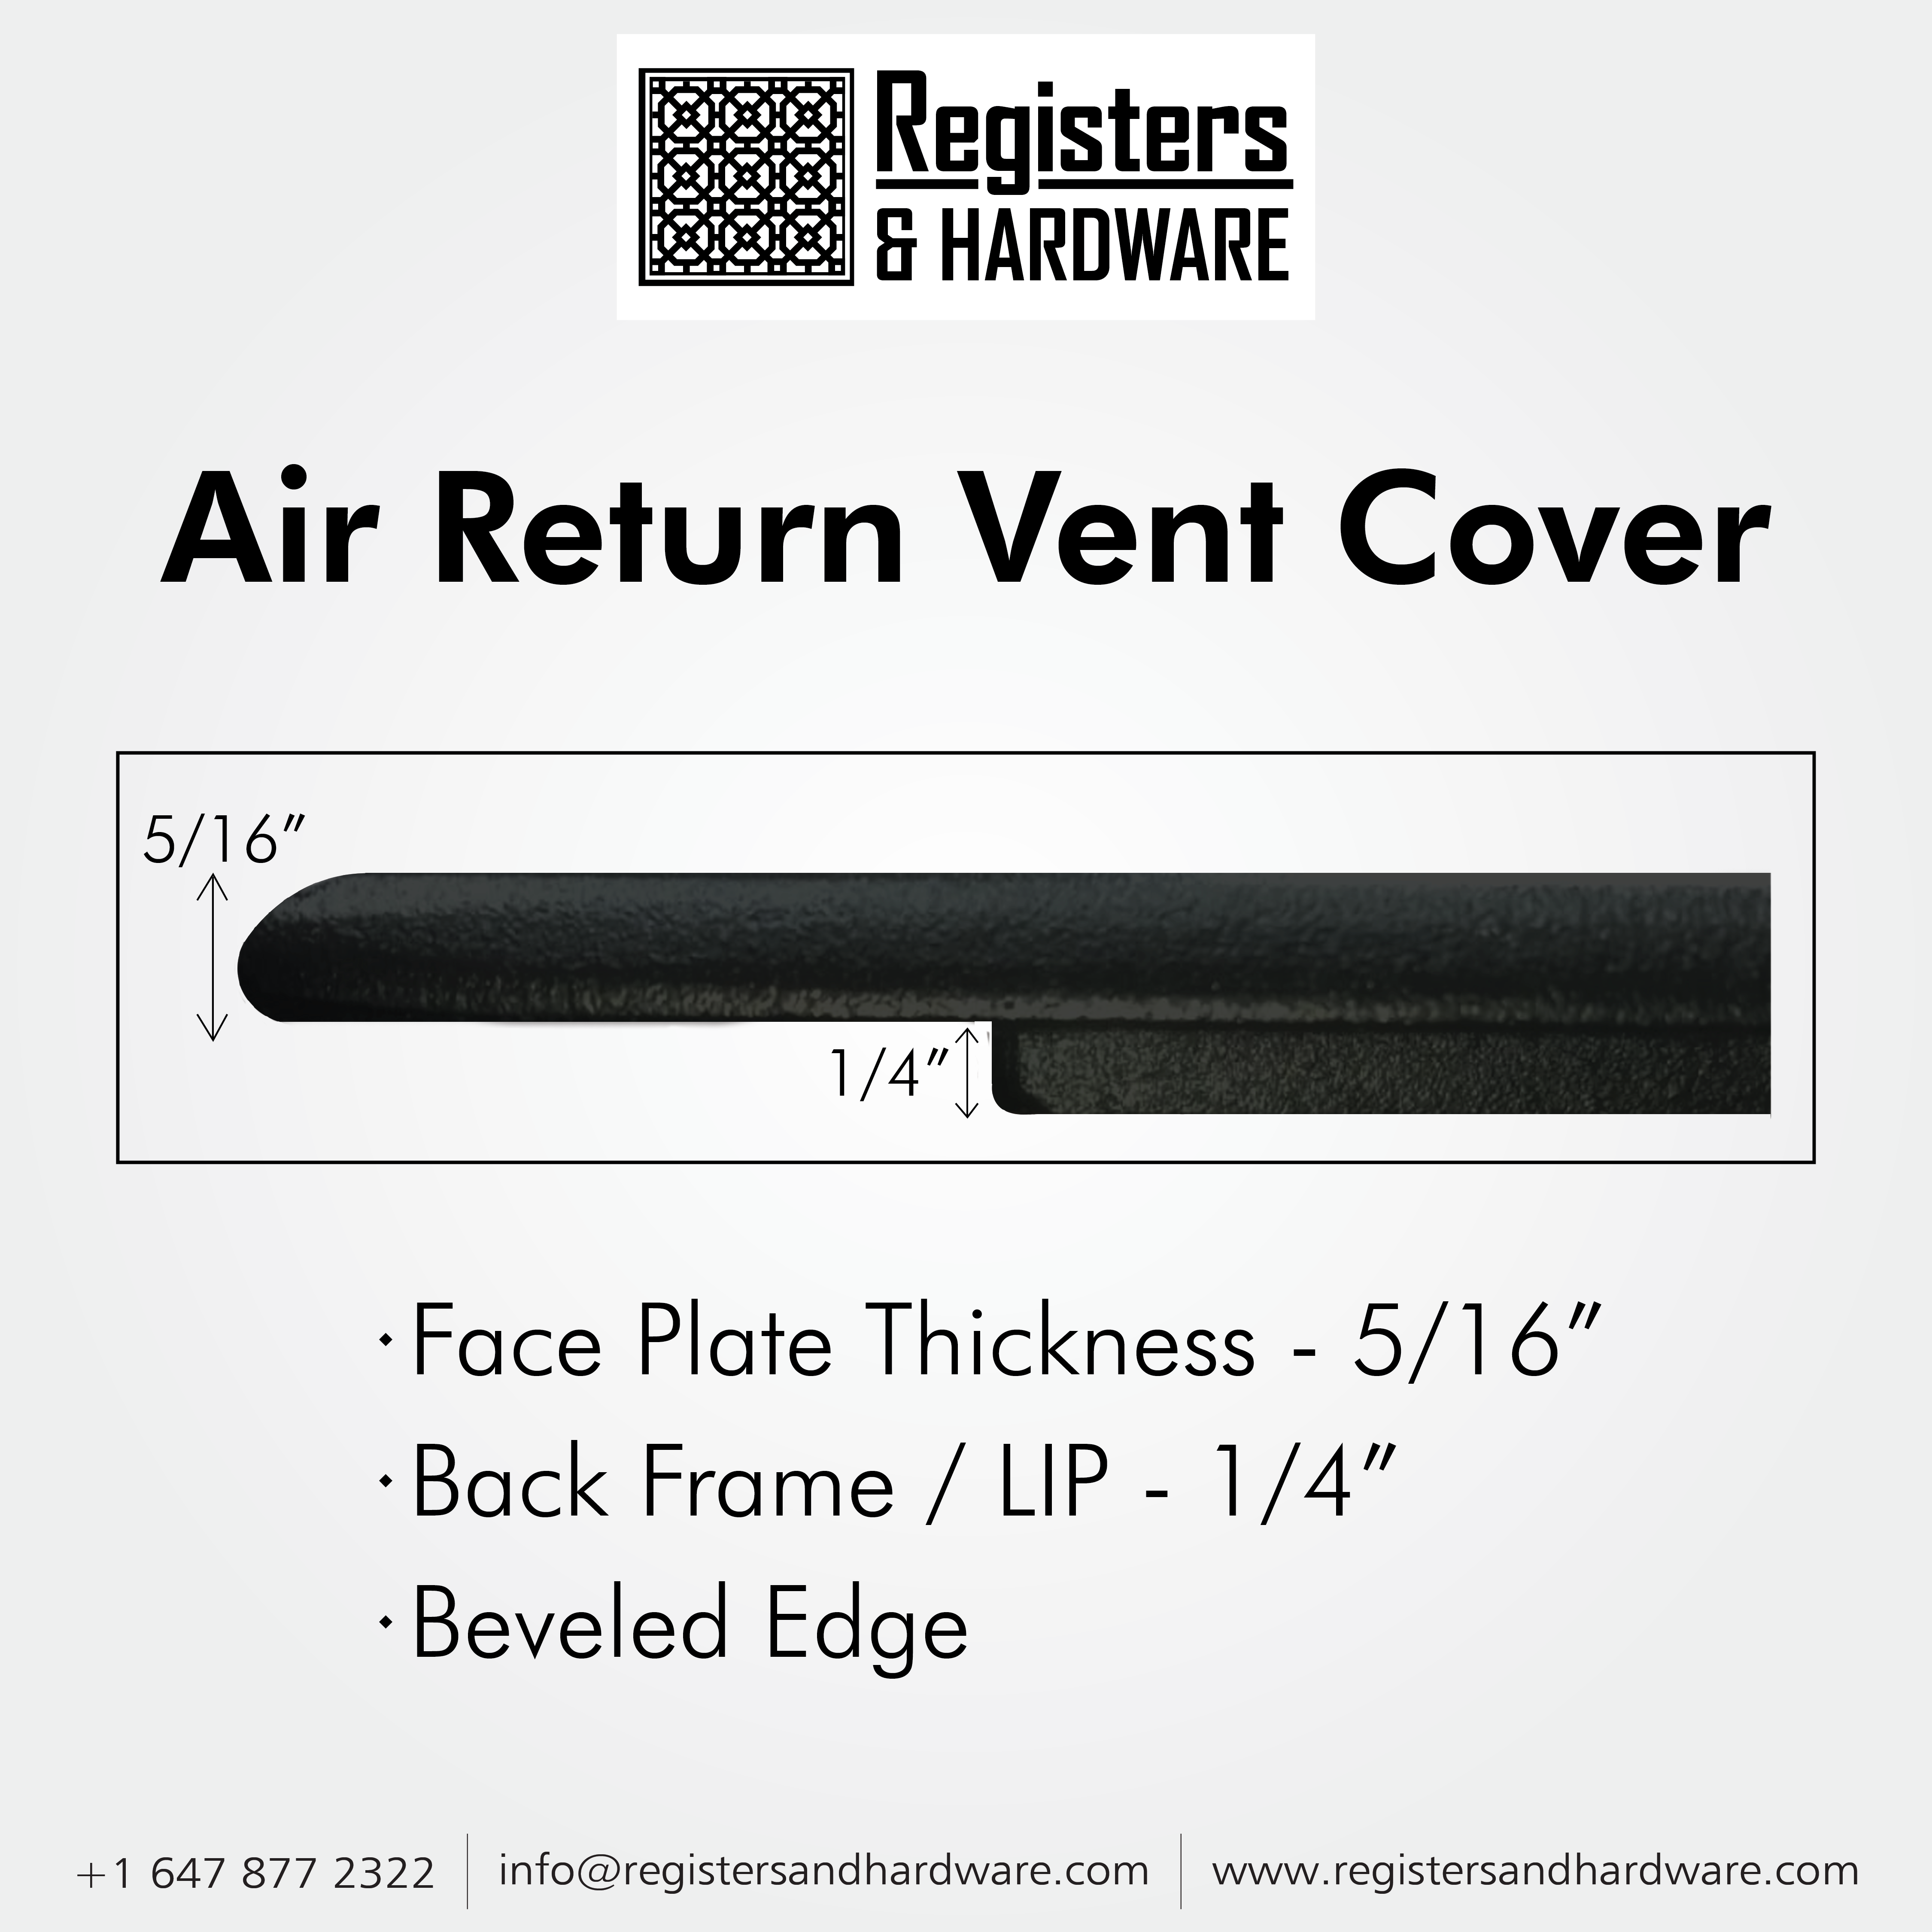 Achtek AIR RETURN 6"x26" Duct Opening (Overall Size 8"x28") | Heavy Cast Aluminum Air Grille HVAC Duct || Powder Coated